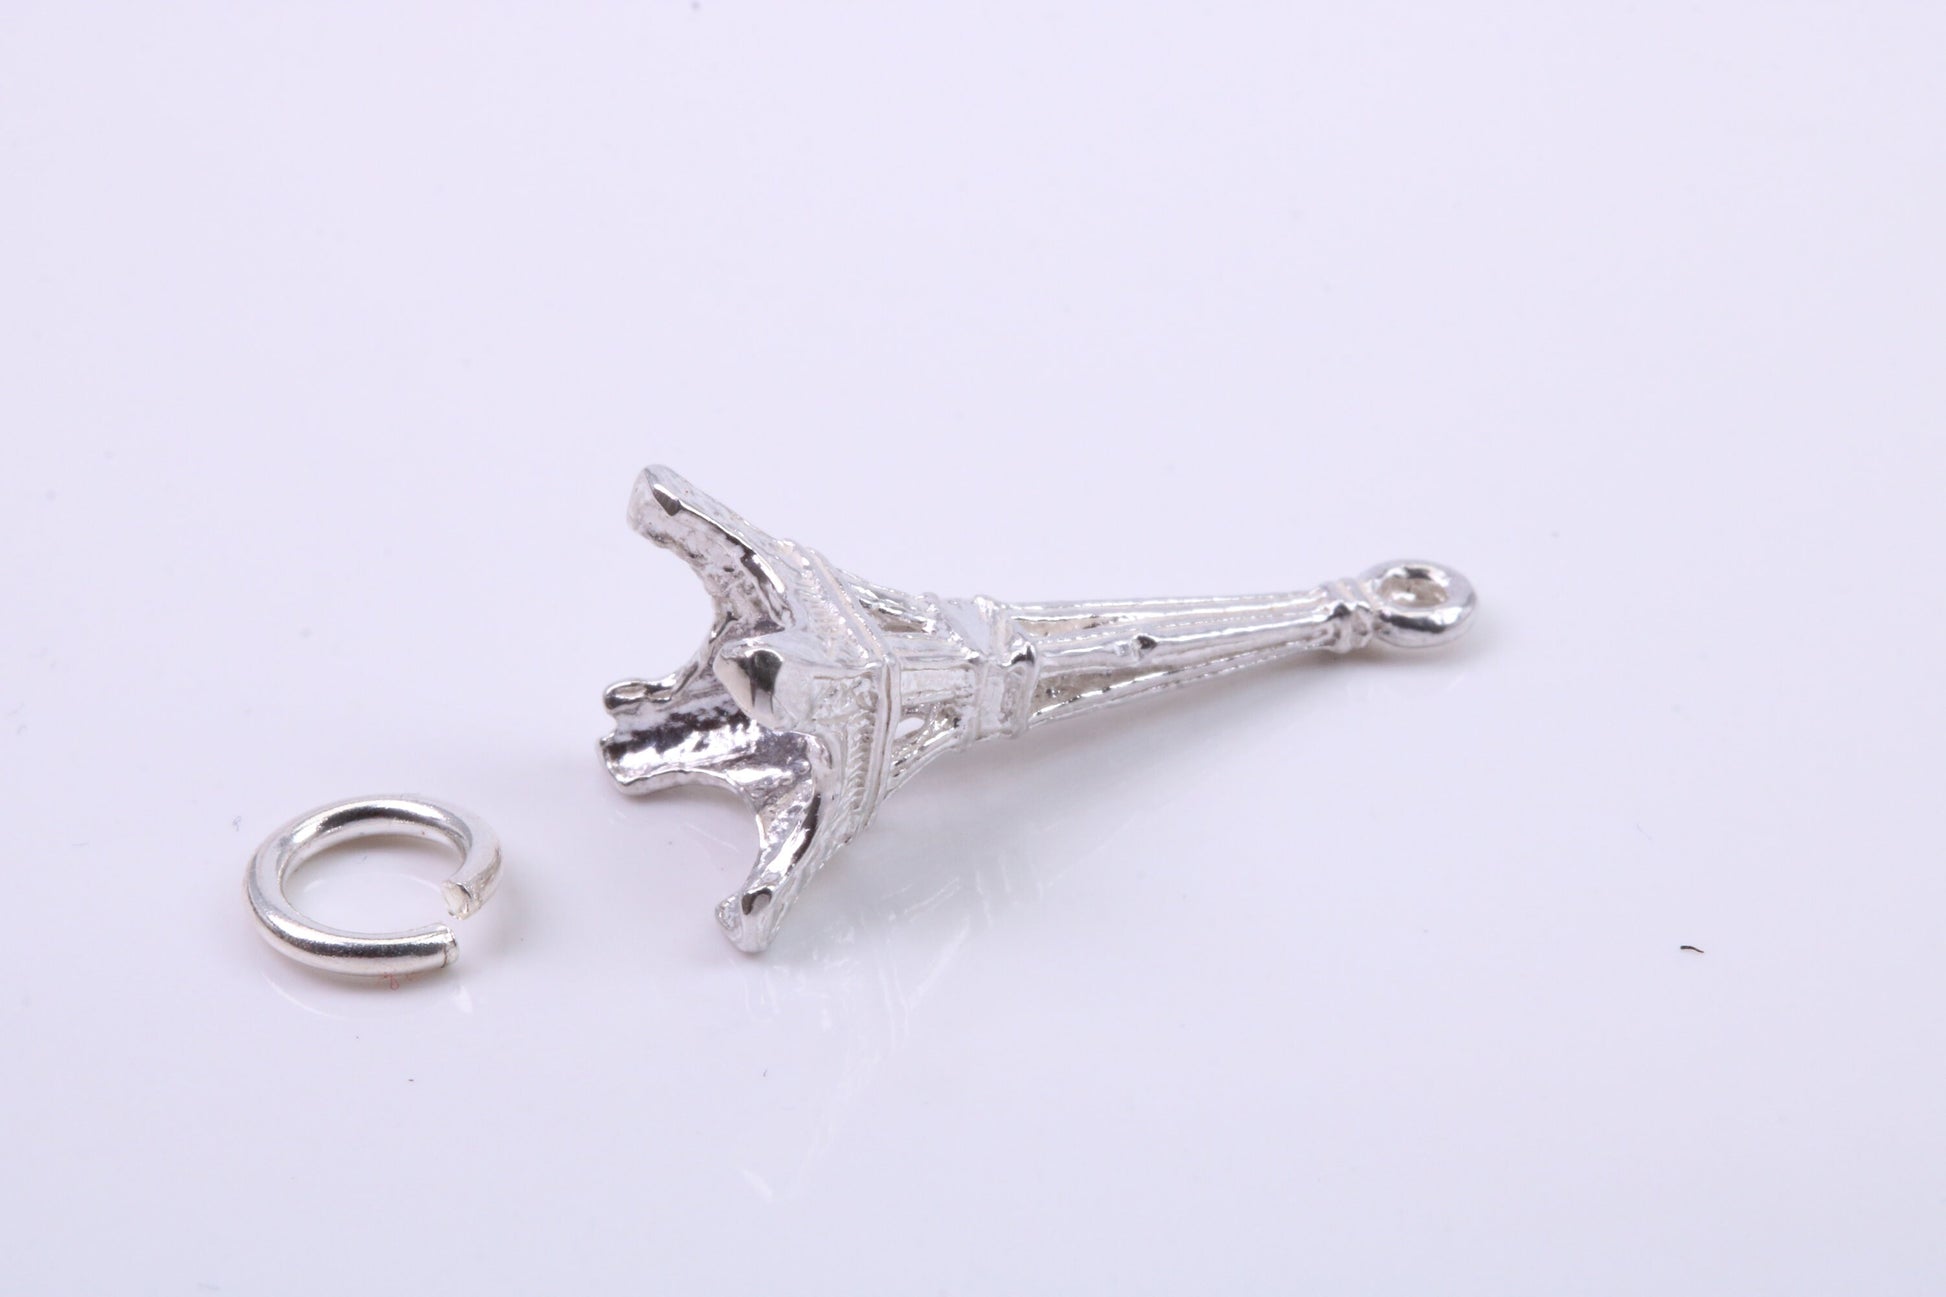 Eiffel Tower Charm, Traditional Charm, Made from Solid 925 Grade Sterling Silver, Complete with Attachment Link